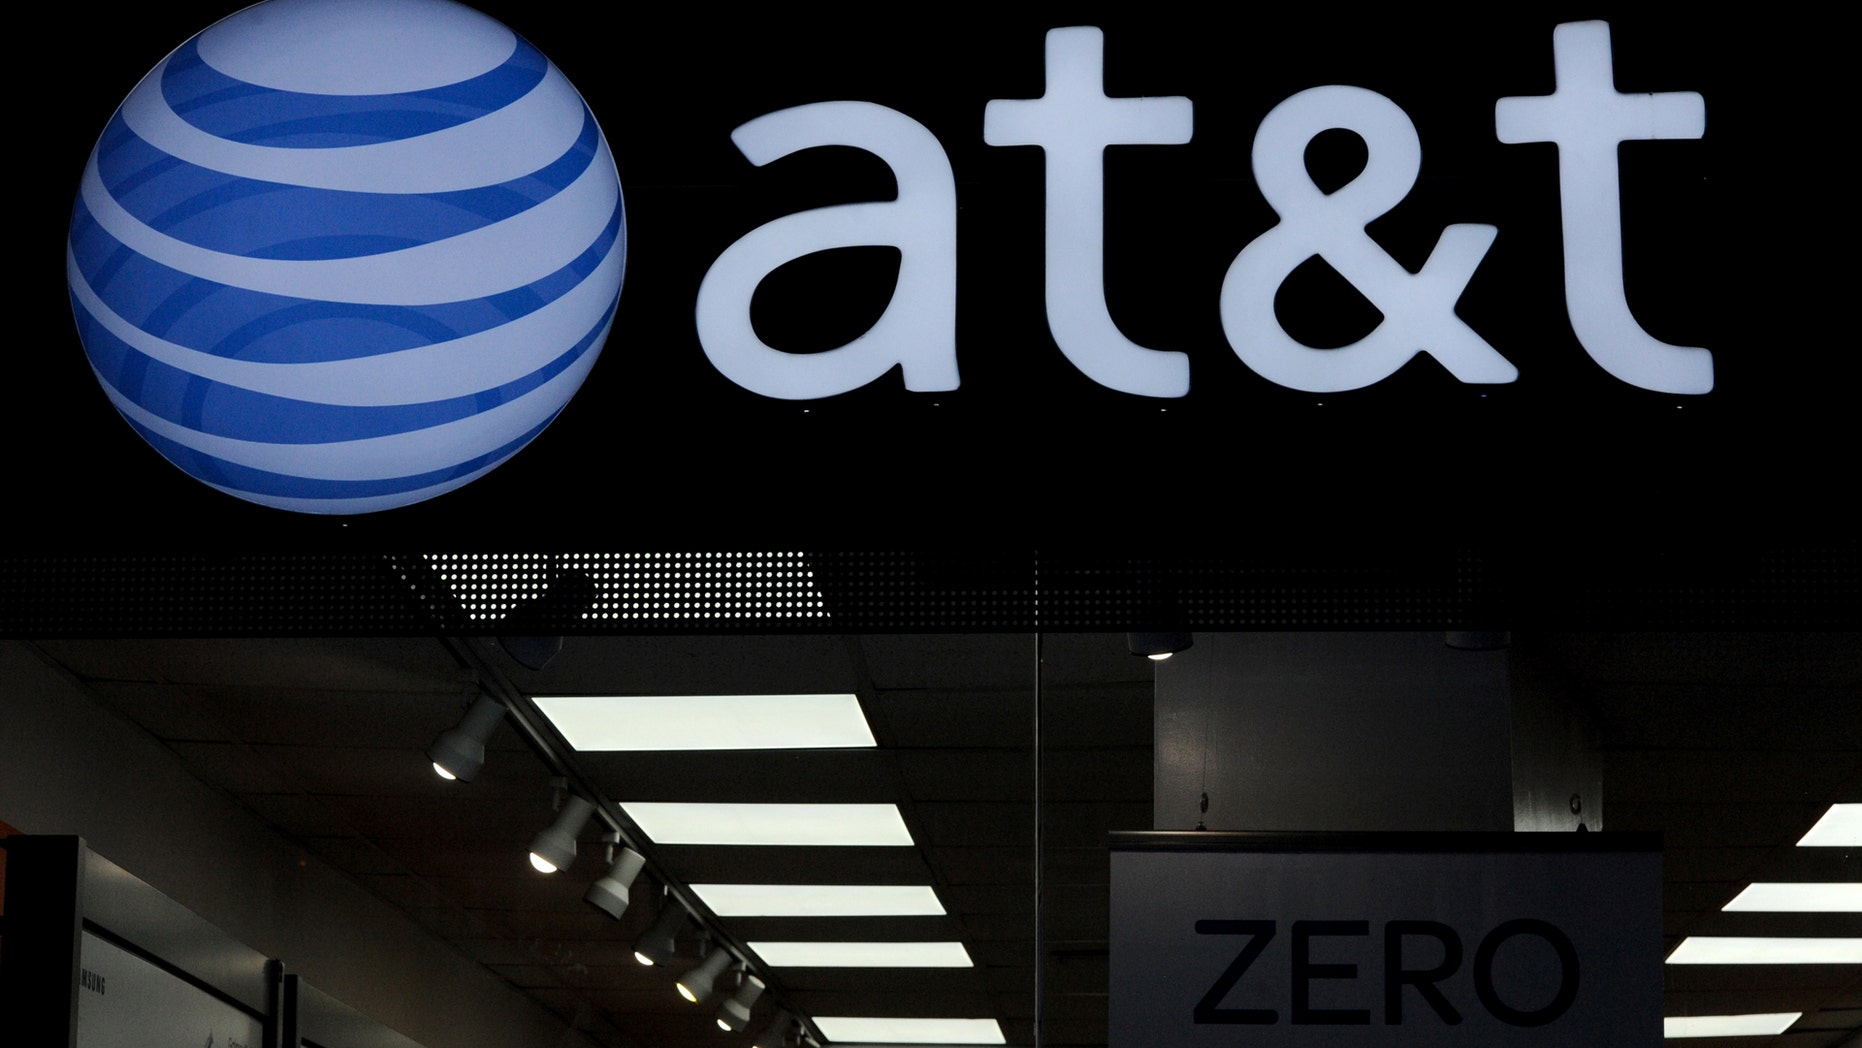 AT&T is putting its fake 5G logo on iPhones too